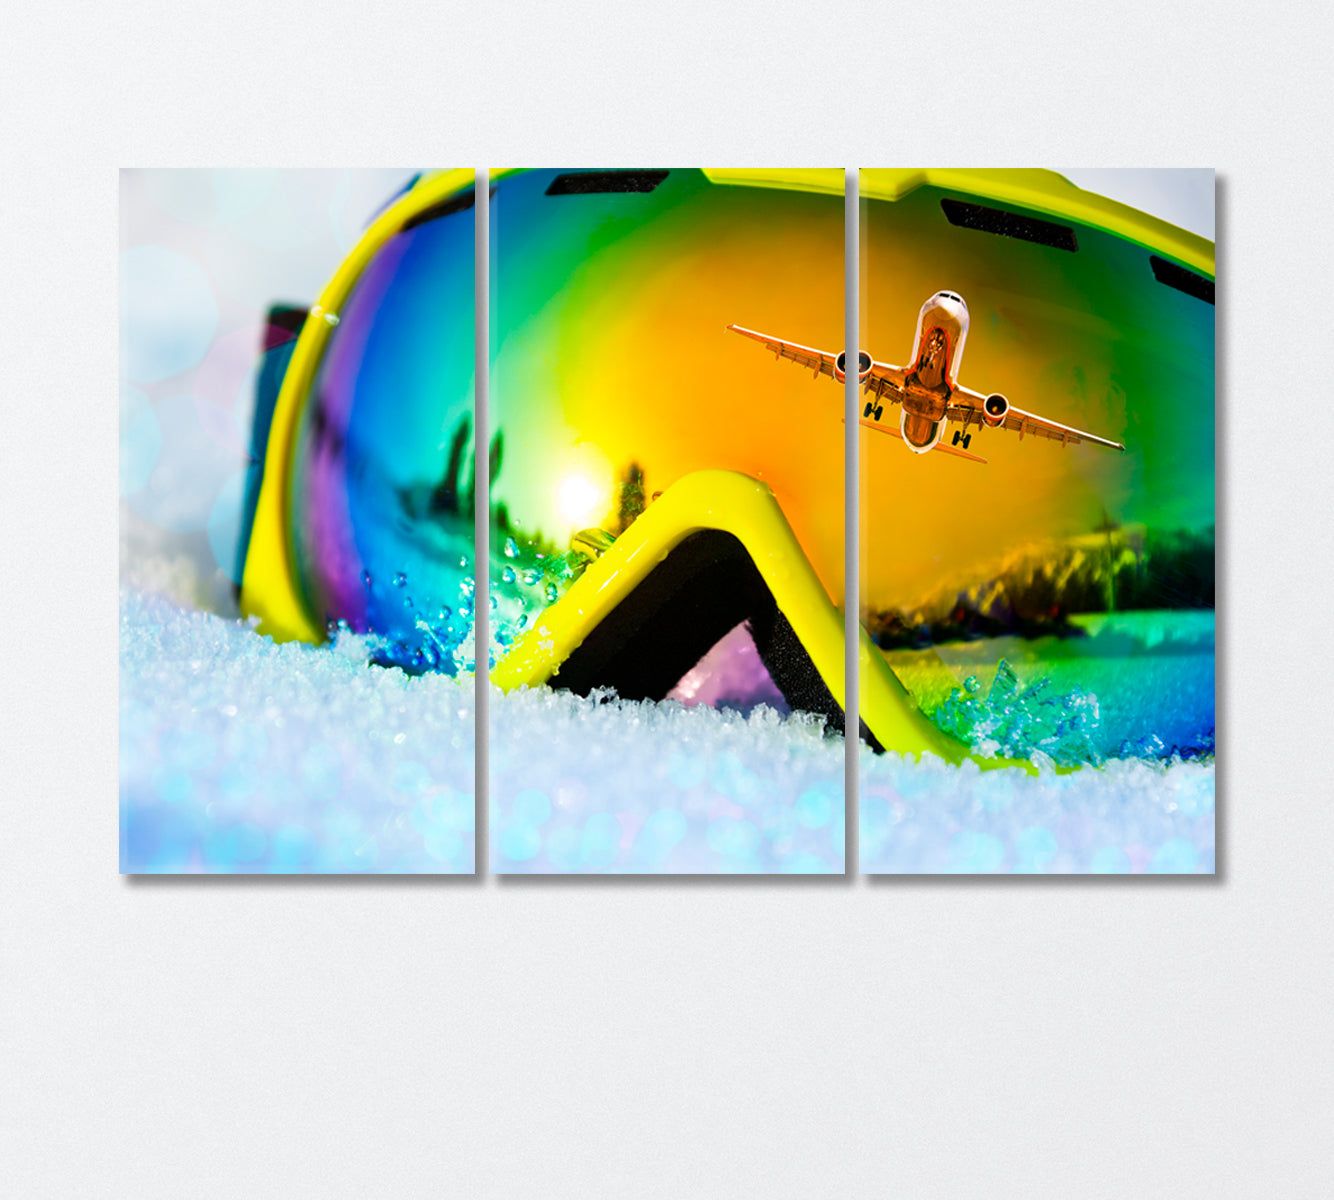 Reflection of Flying Plane in Ski Mask Canvas Print-Canvas Print-CetArt-3 Panels-36x24 inches-CetArt